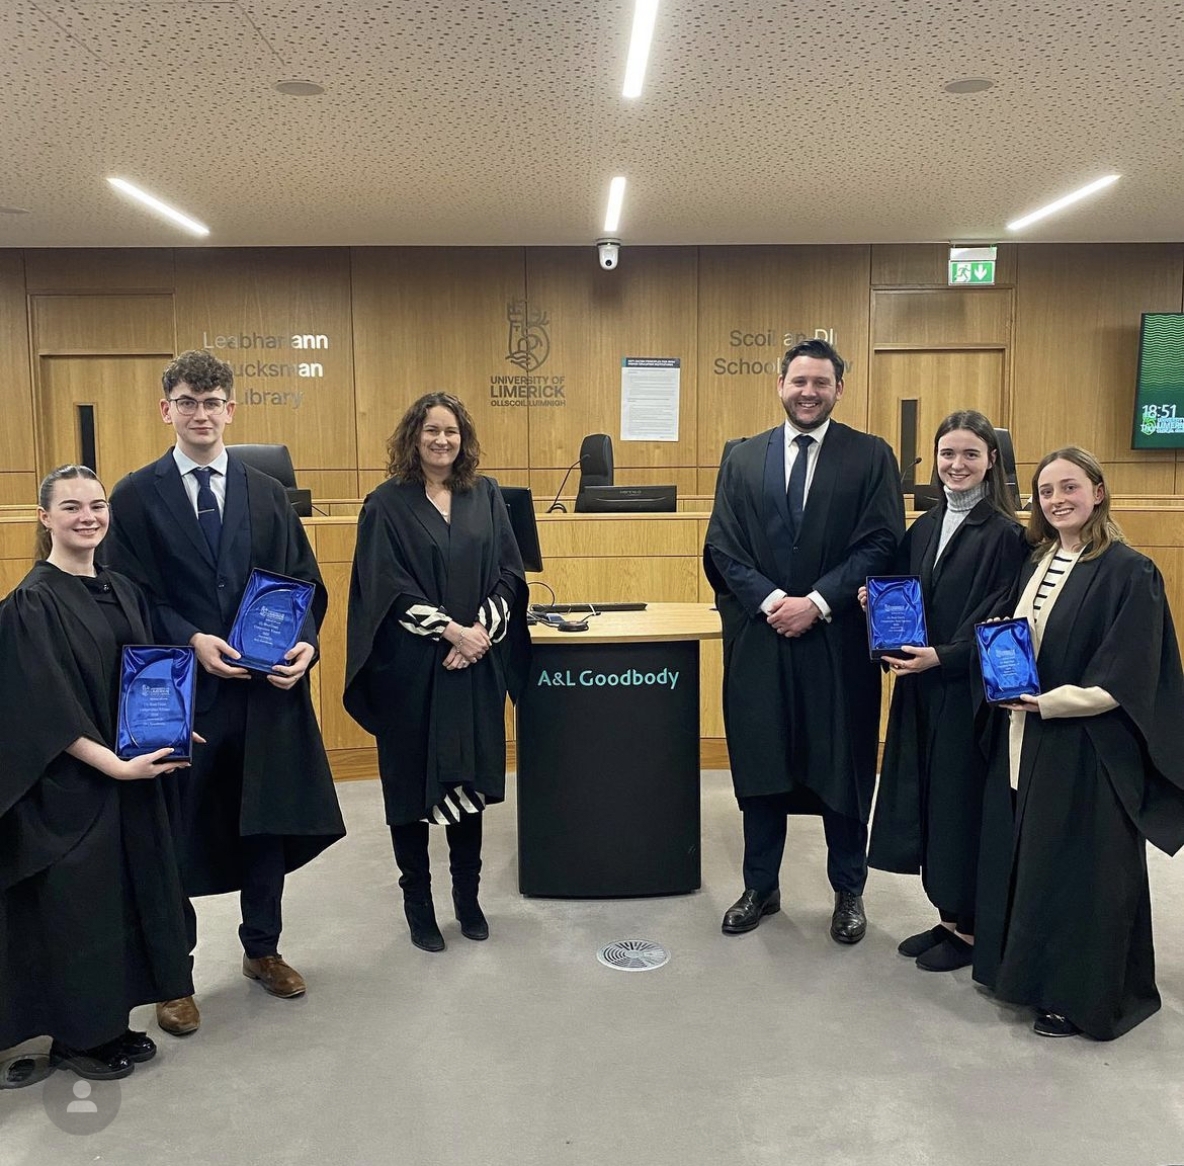 Winners of Best Team and Best Speaker at A&L Goodbody Mooting Competition 2023